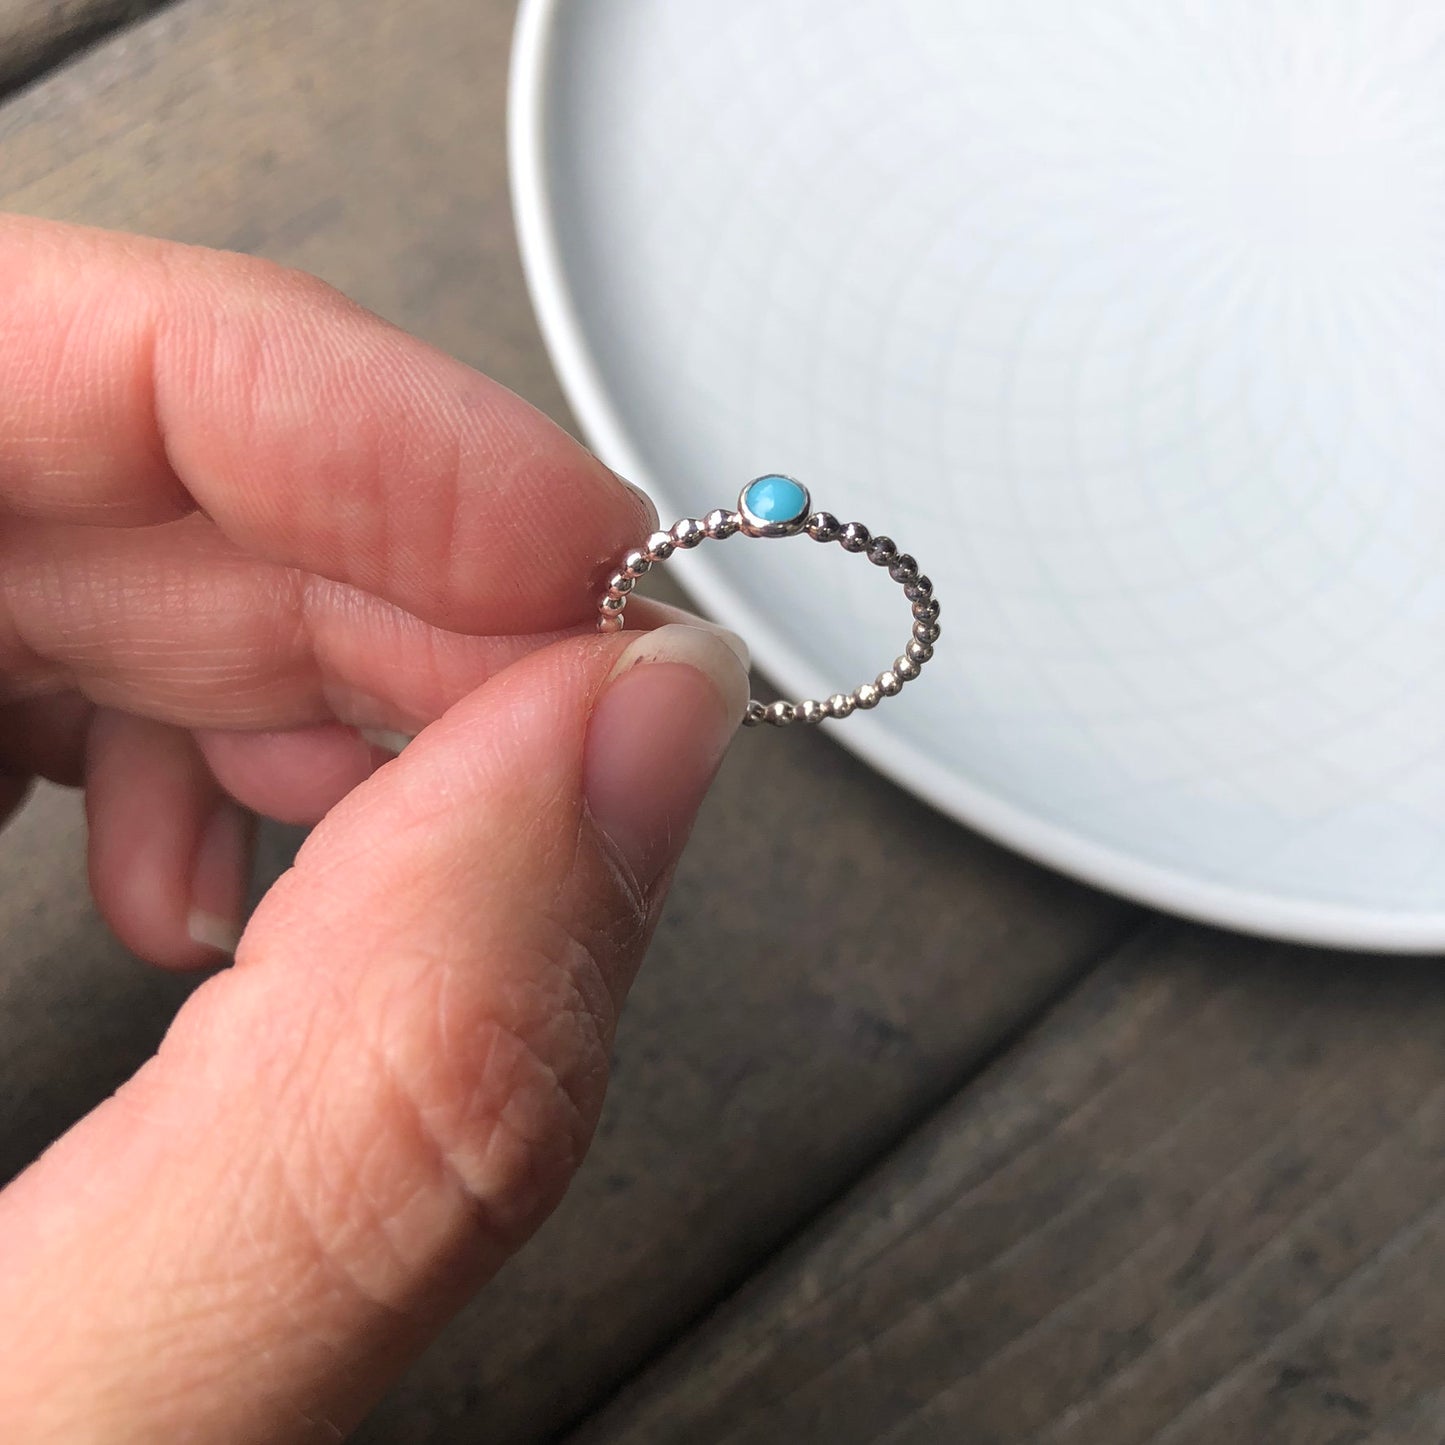 Woman holding a Mini Turquoise Sterling Silver Ring - Trisha Flanagan